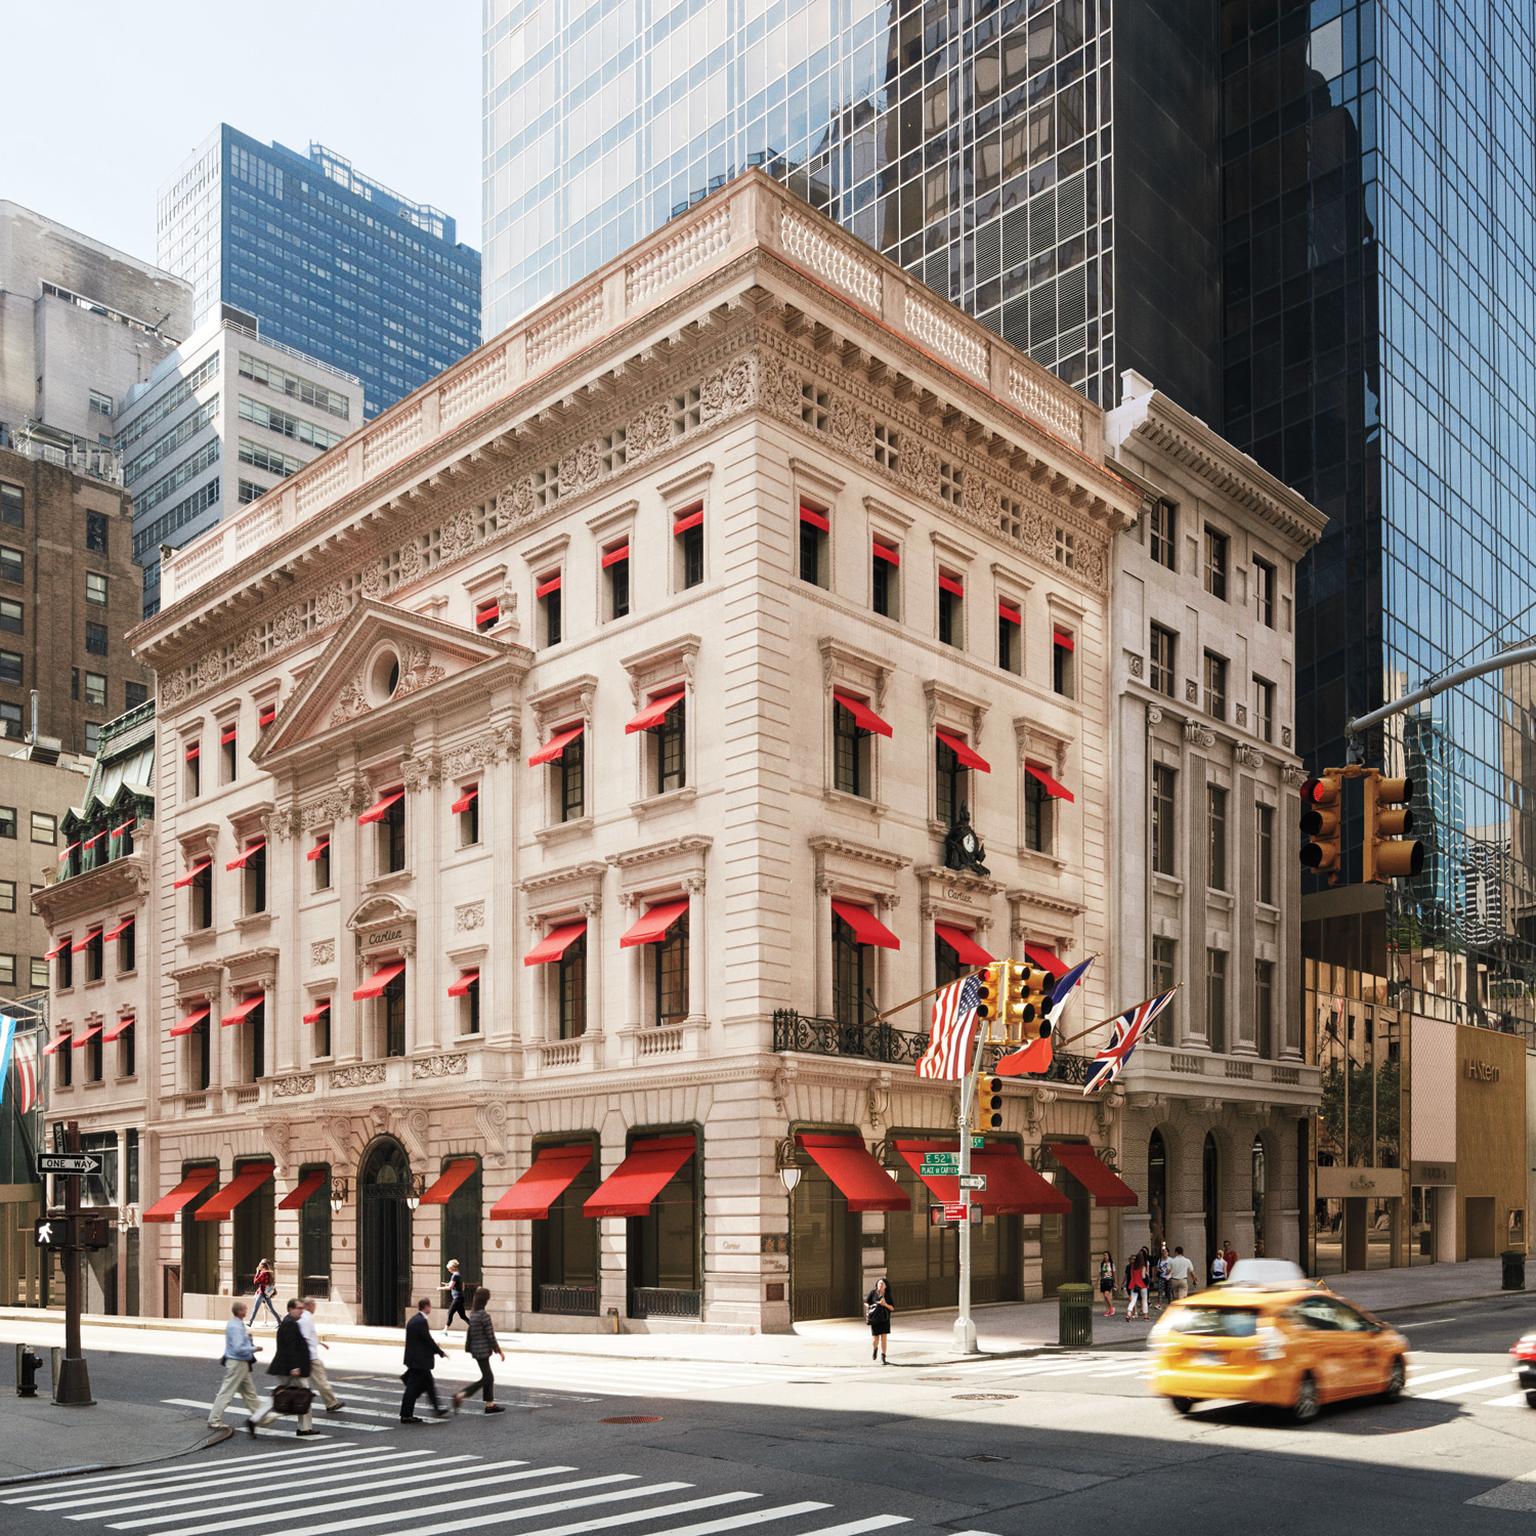 Cartier's New York mansion restored to 